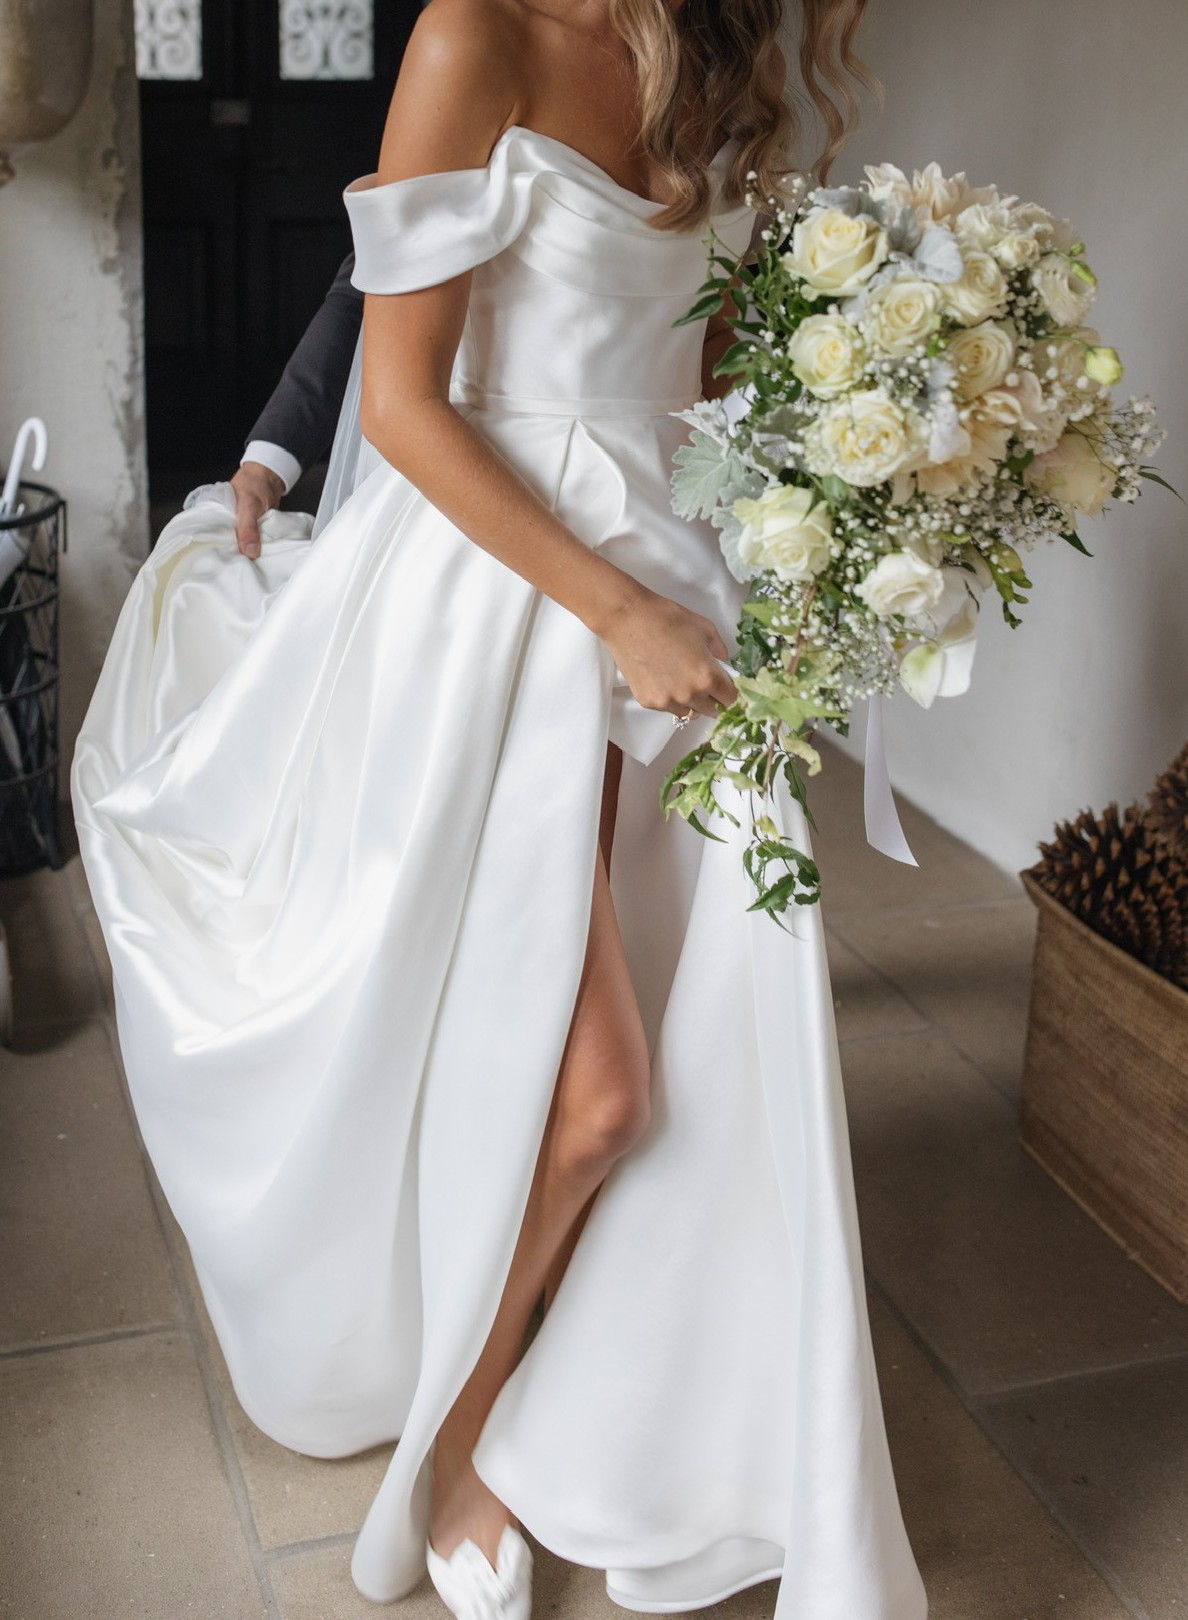 Le Belle V2 by Hera Couture is - Homestead Road Bridal Co